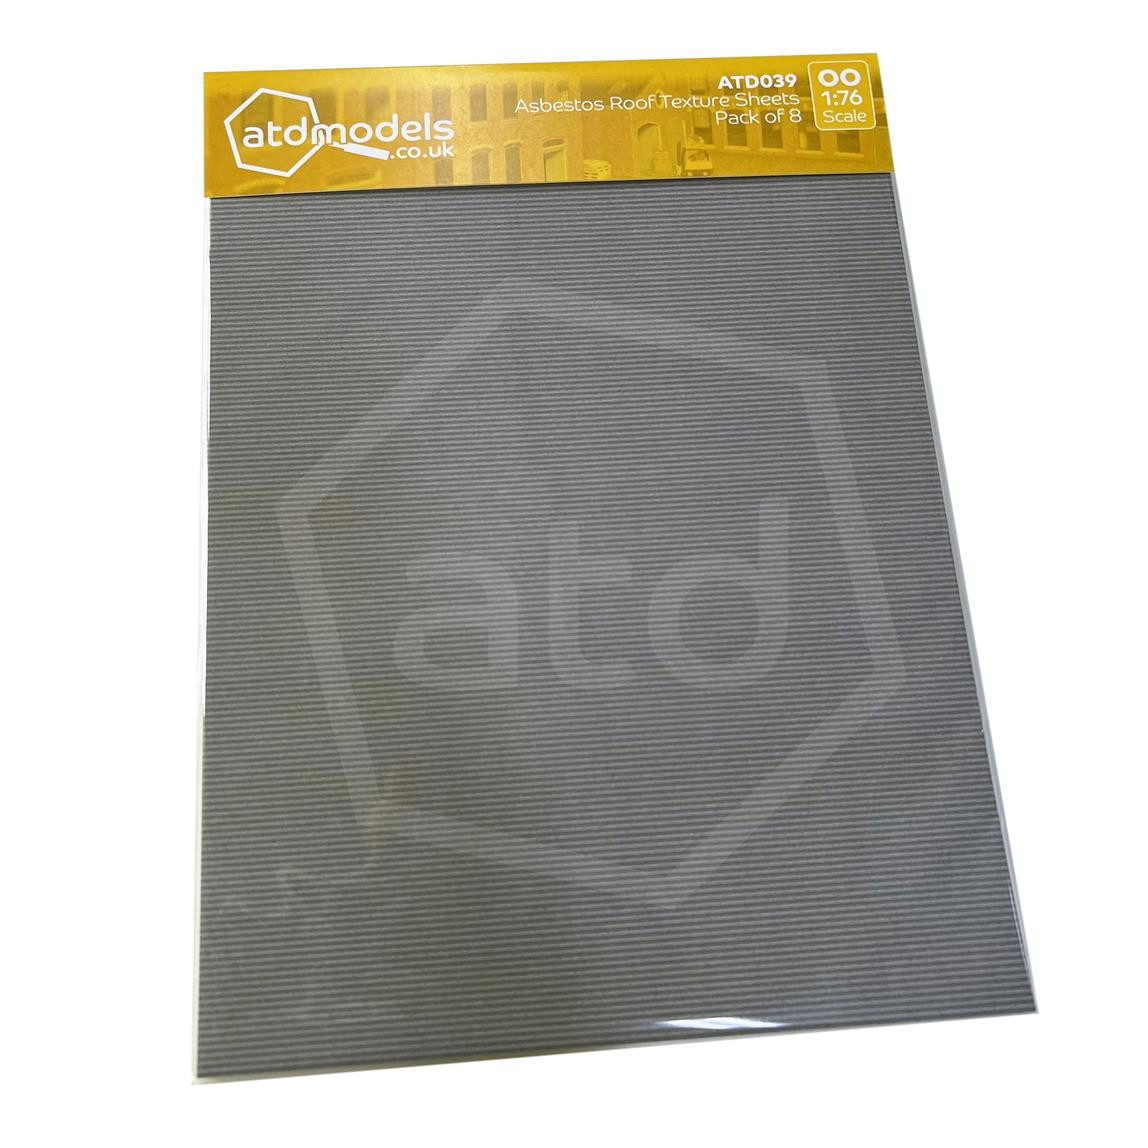 ATD039 ATD Models Asbestos Roofing Texture Pack (8 x A4 Sheets)